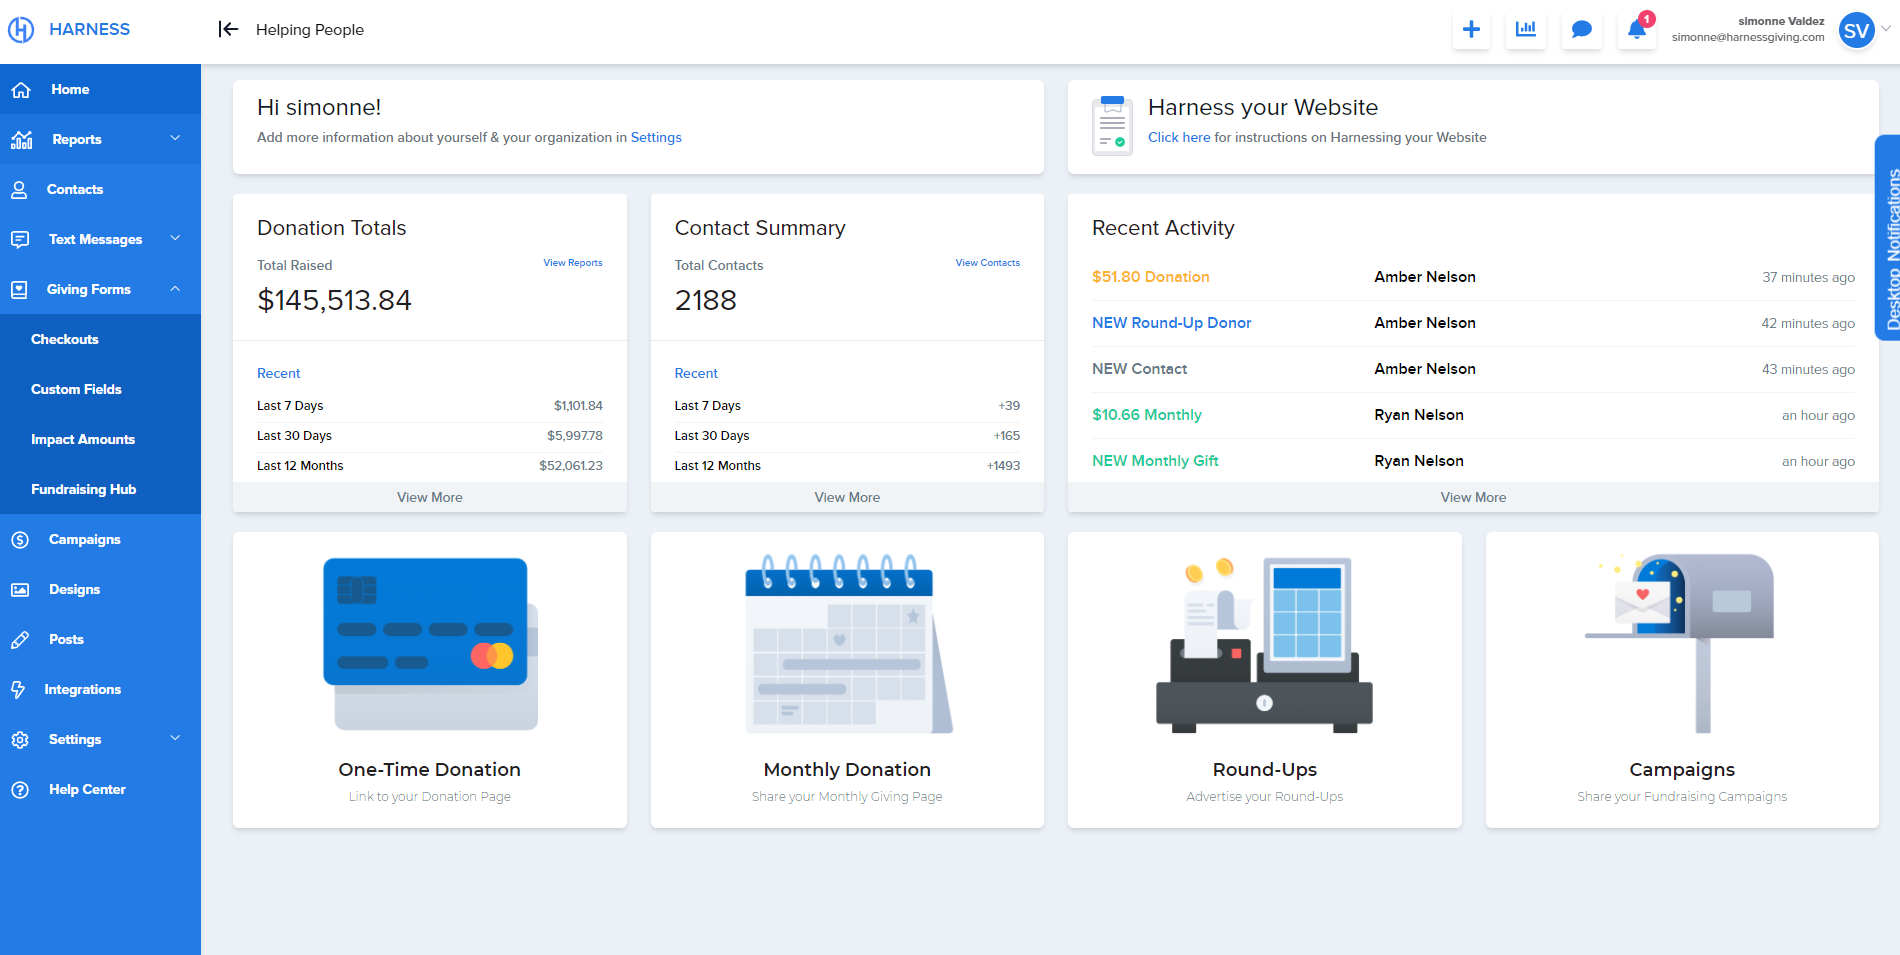 Full Admin Dashboard to give you a high level view of how your fundraising efforts are performing.